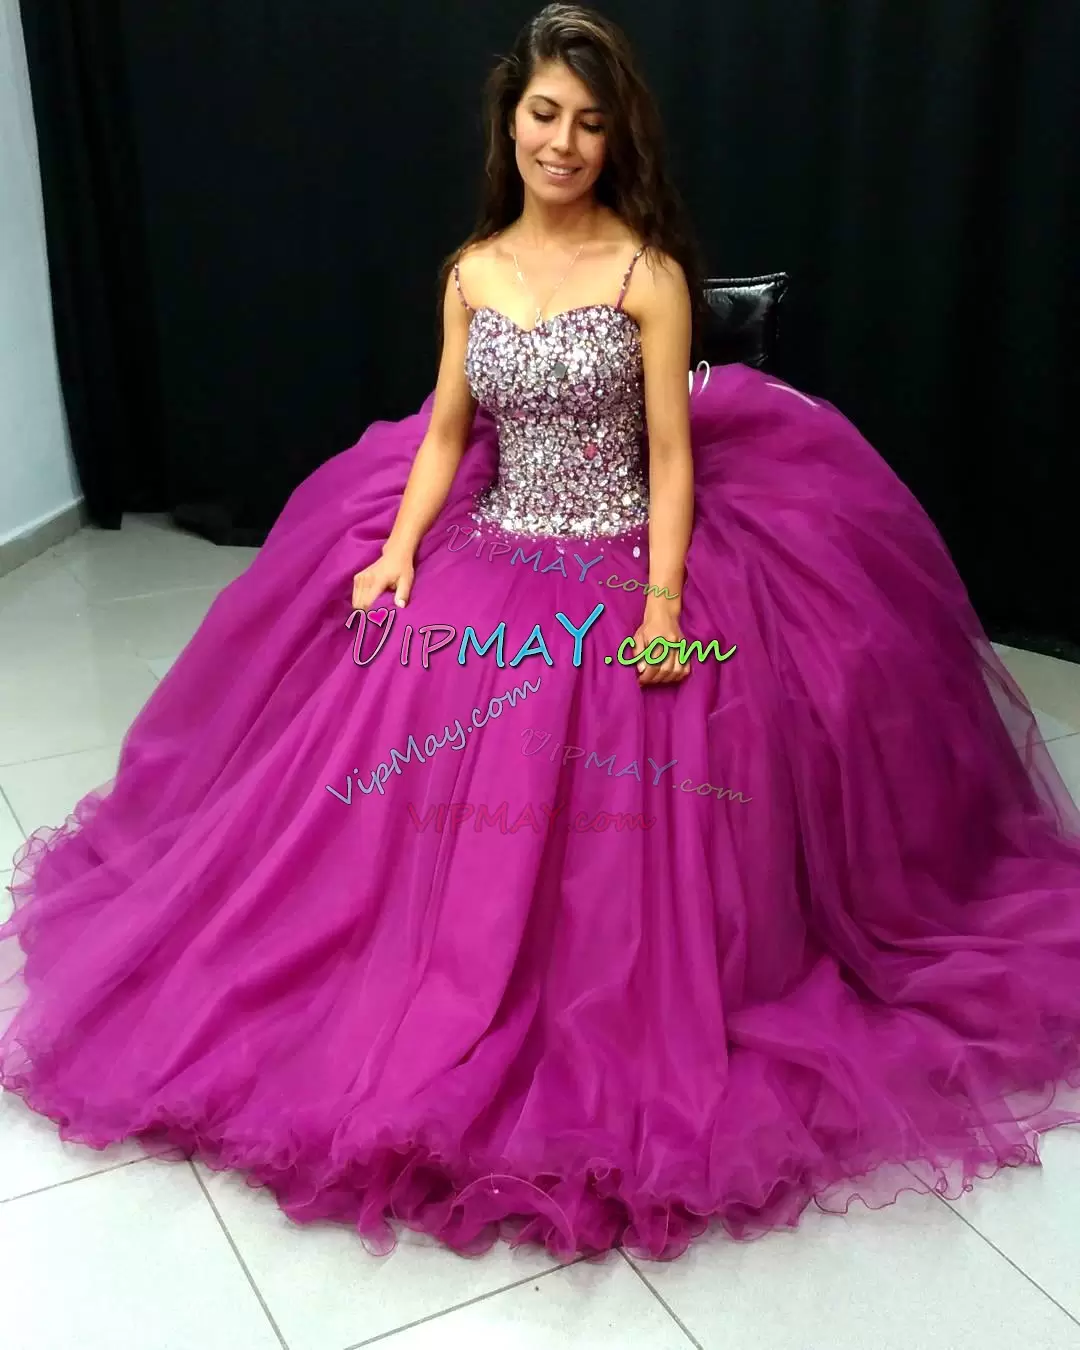 modest quinceanera dress with straps,cheap quinceanera dress stores,cheap quinceanera dress from china,simple quinceanera dress cheap,tulle and stain quinceanera dress,tulle skirt formal dress,fuchsia quinceanera dress,spaghetti strap ball gown quinceanera dress,spaghetti strap formal dress,quince dress with straps,crystal quinceanera dress,beaded top quinceanera dress,quinceanera dress under 200 dollars,